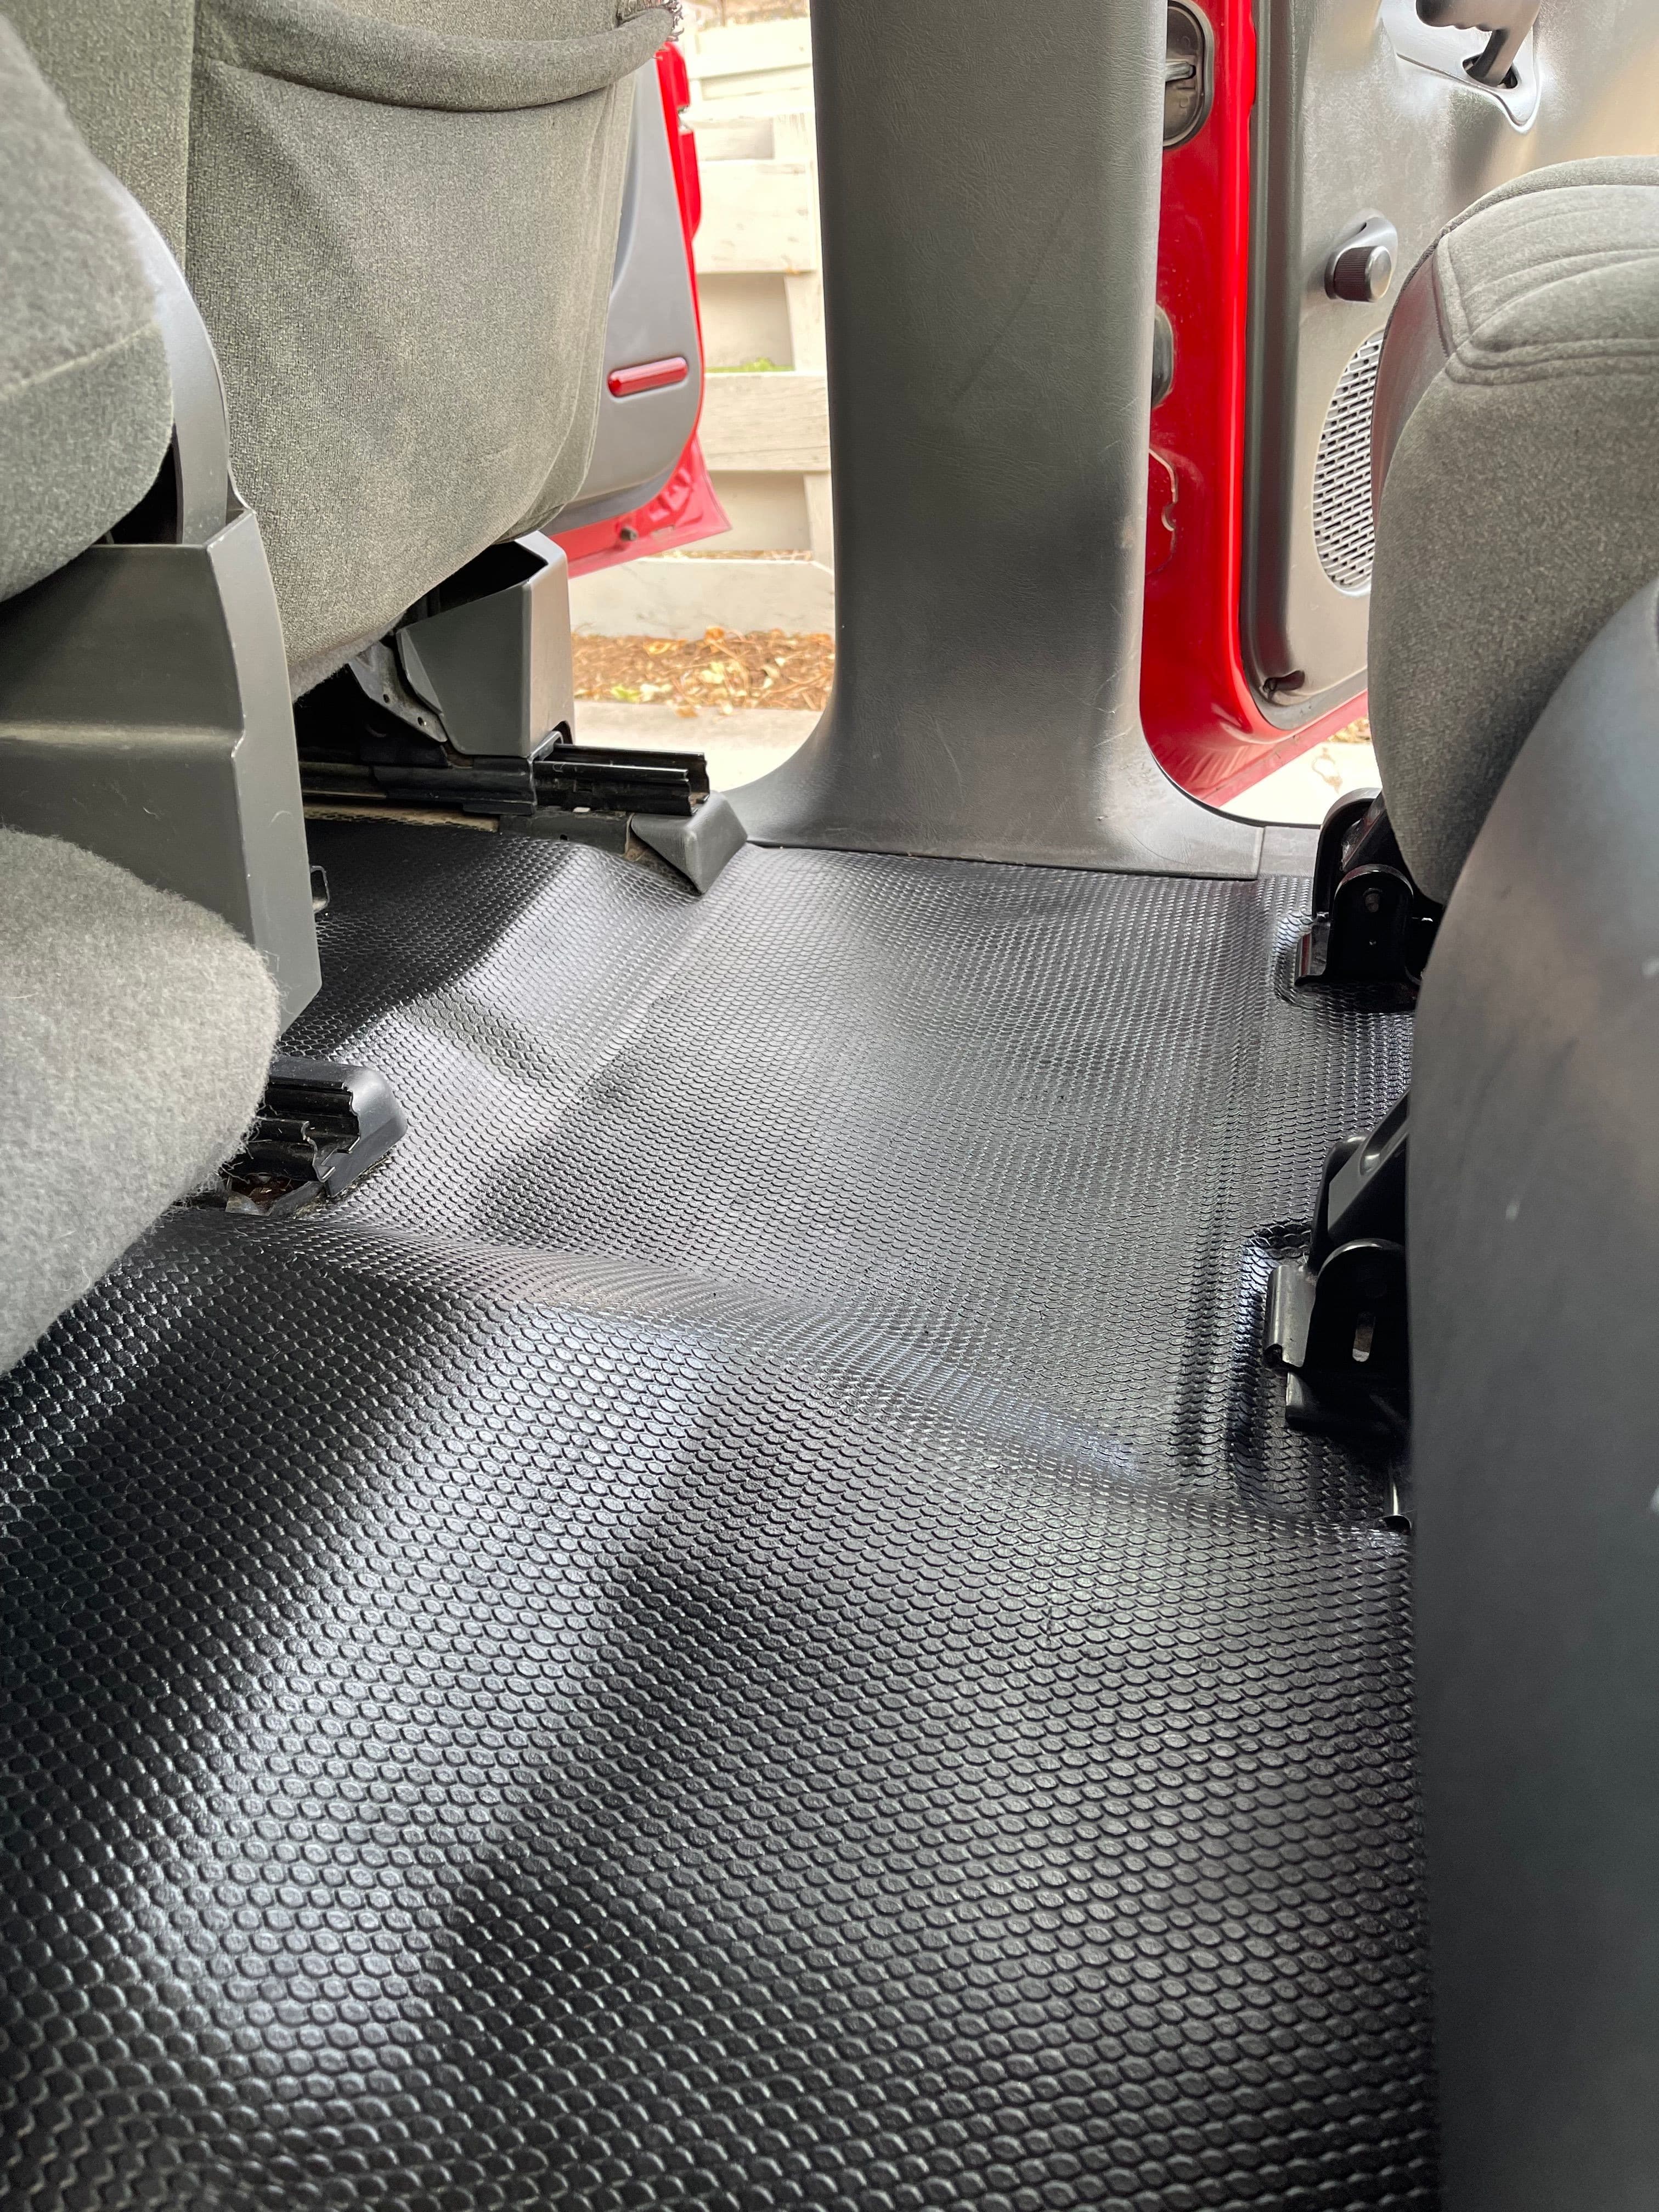 This vehicles plastic flooring has been cleaned, and as requested by the customer,dressed with an interior dressing